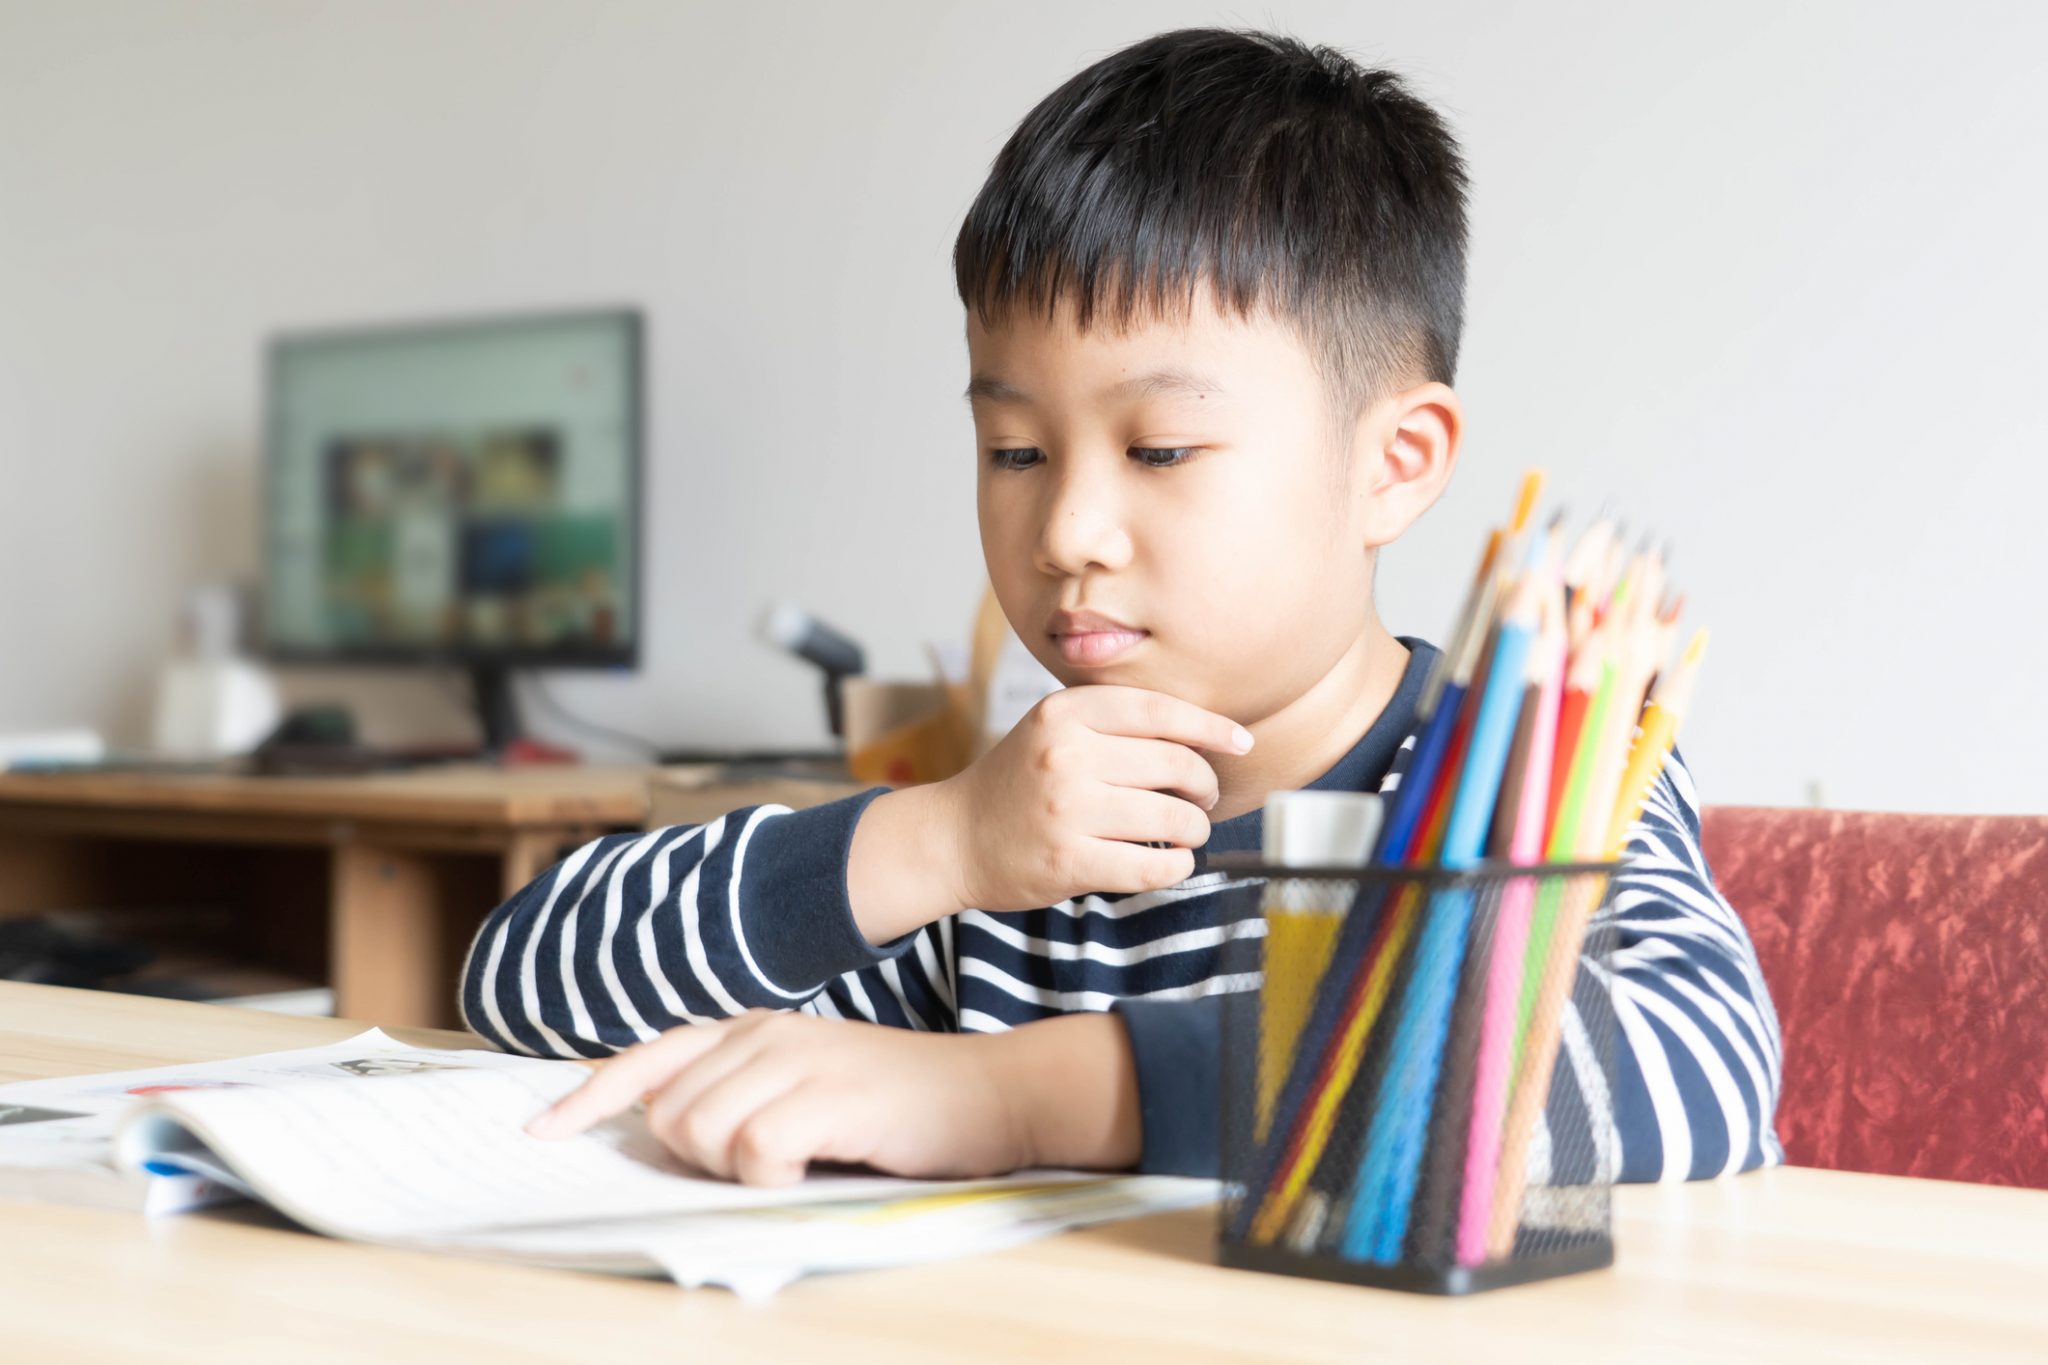 Boy thinking with pencil in hand